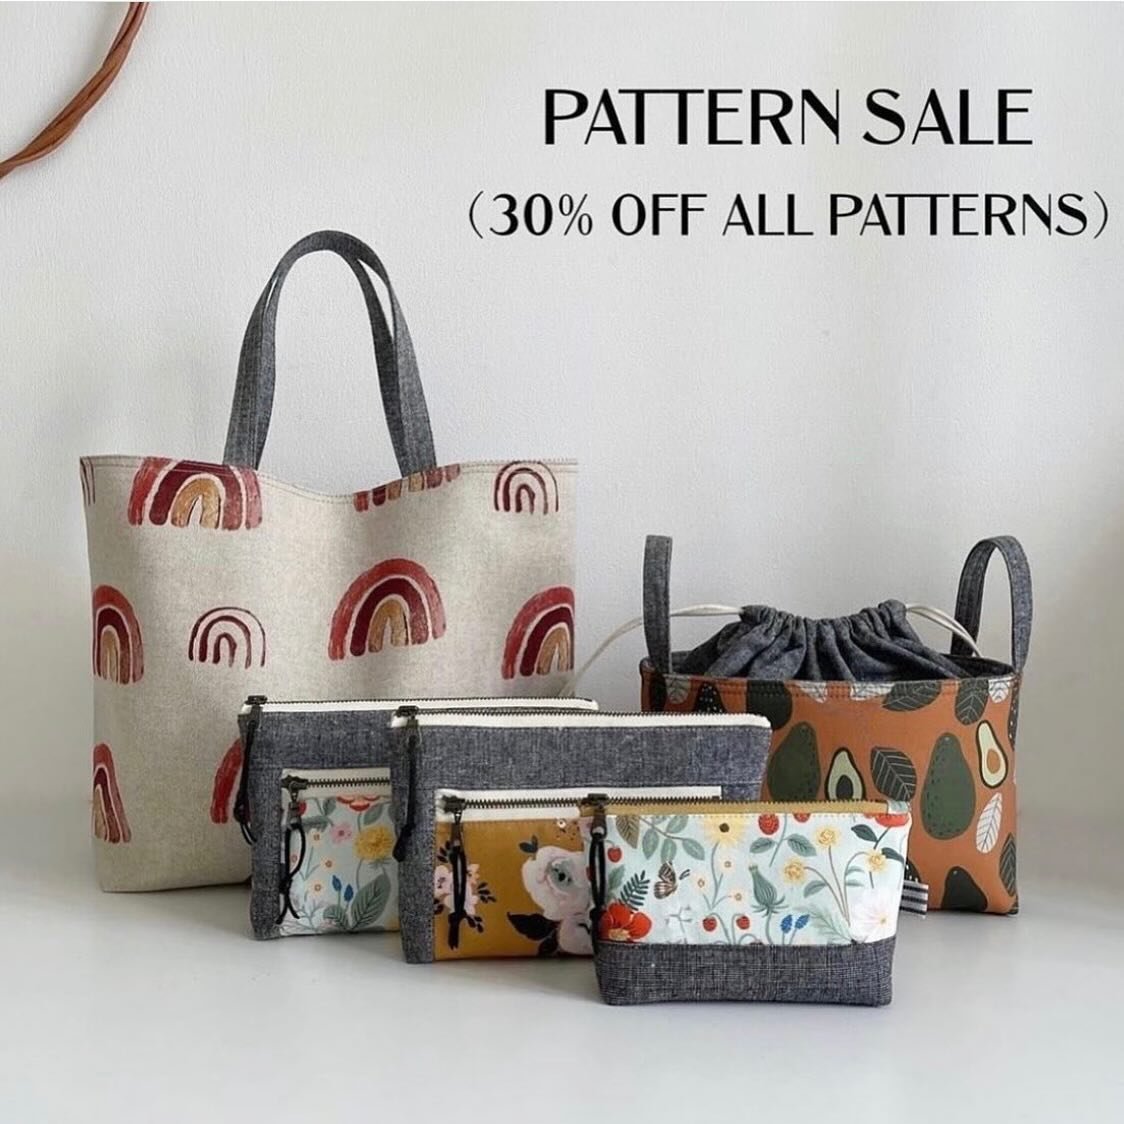 PATTERN SALE !!! Get all my pattern at 30% discounted price now through Sunday, April 28th.

No coupon needed. The price has been adjusted.

Find the link in my profile.

Happy Friday, everyone! I hope you&rsquo;ll find a pattern (or more) you love. 